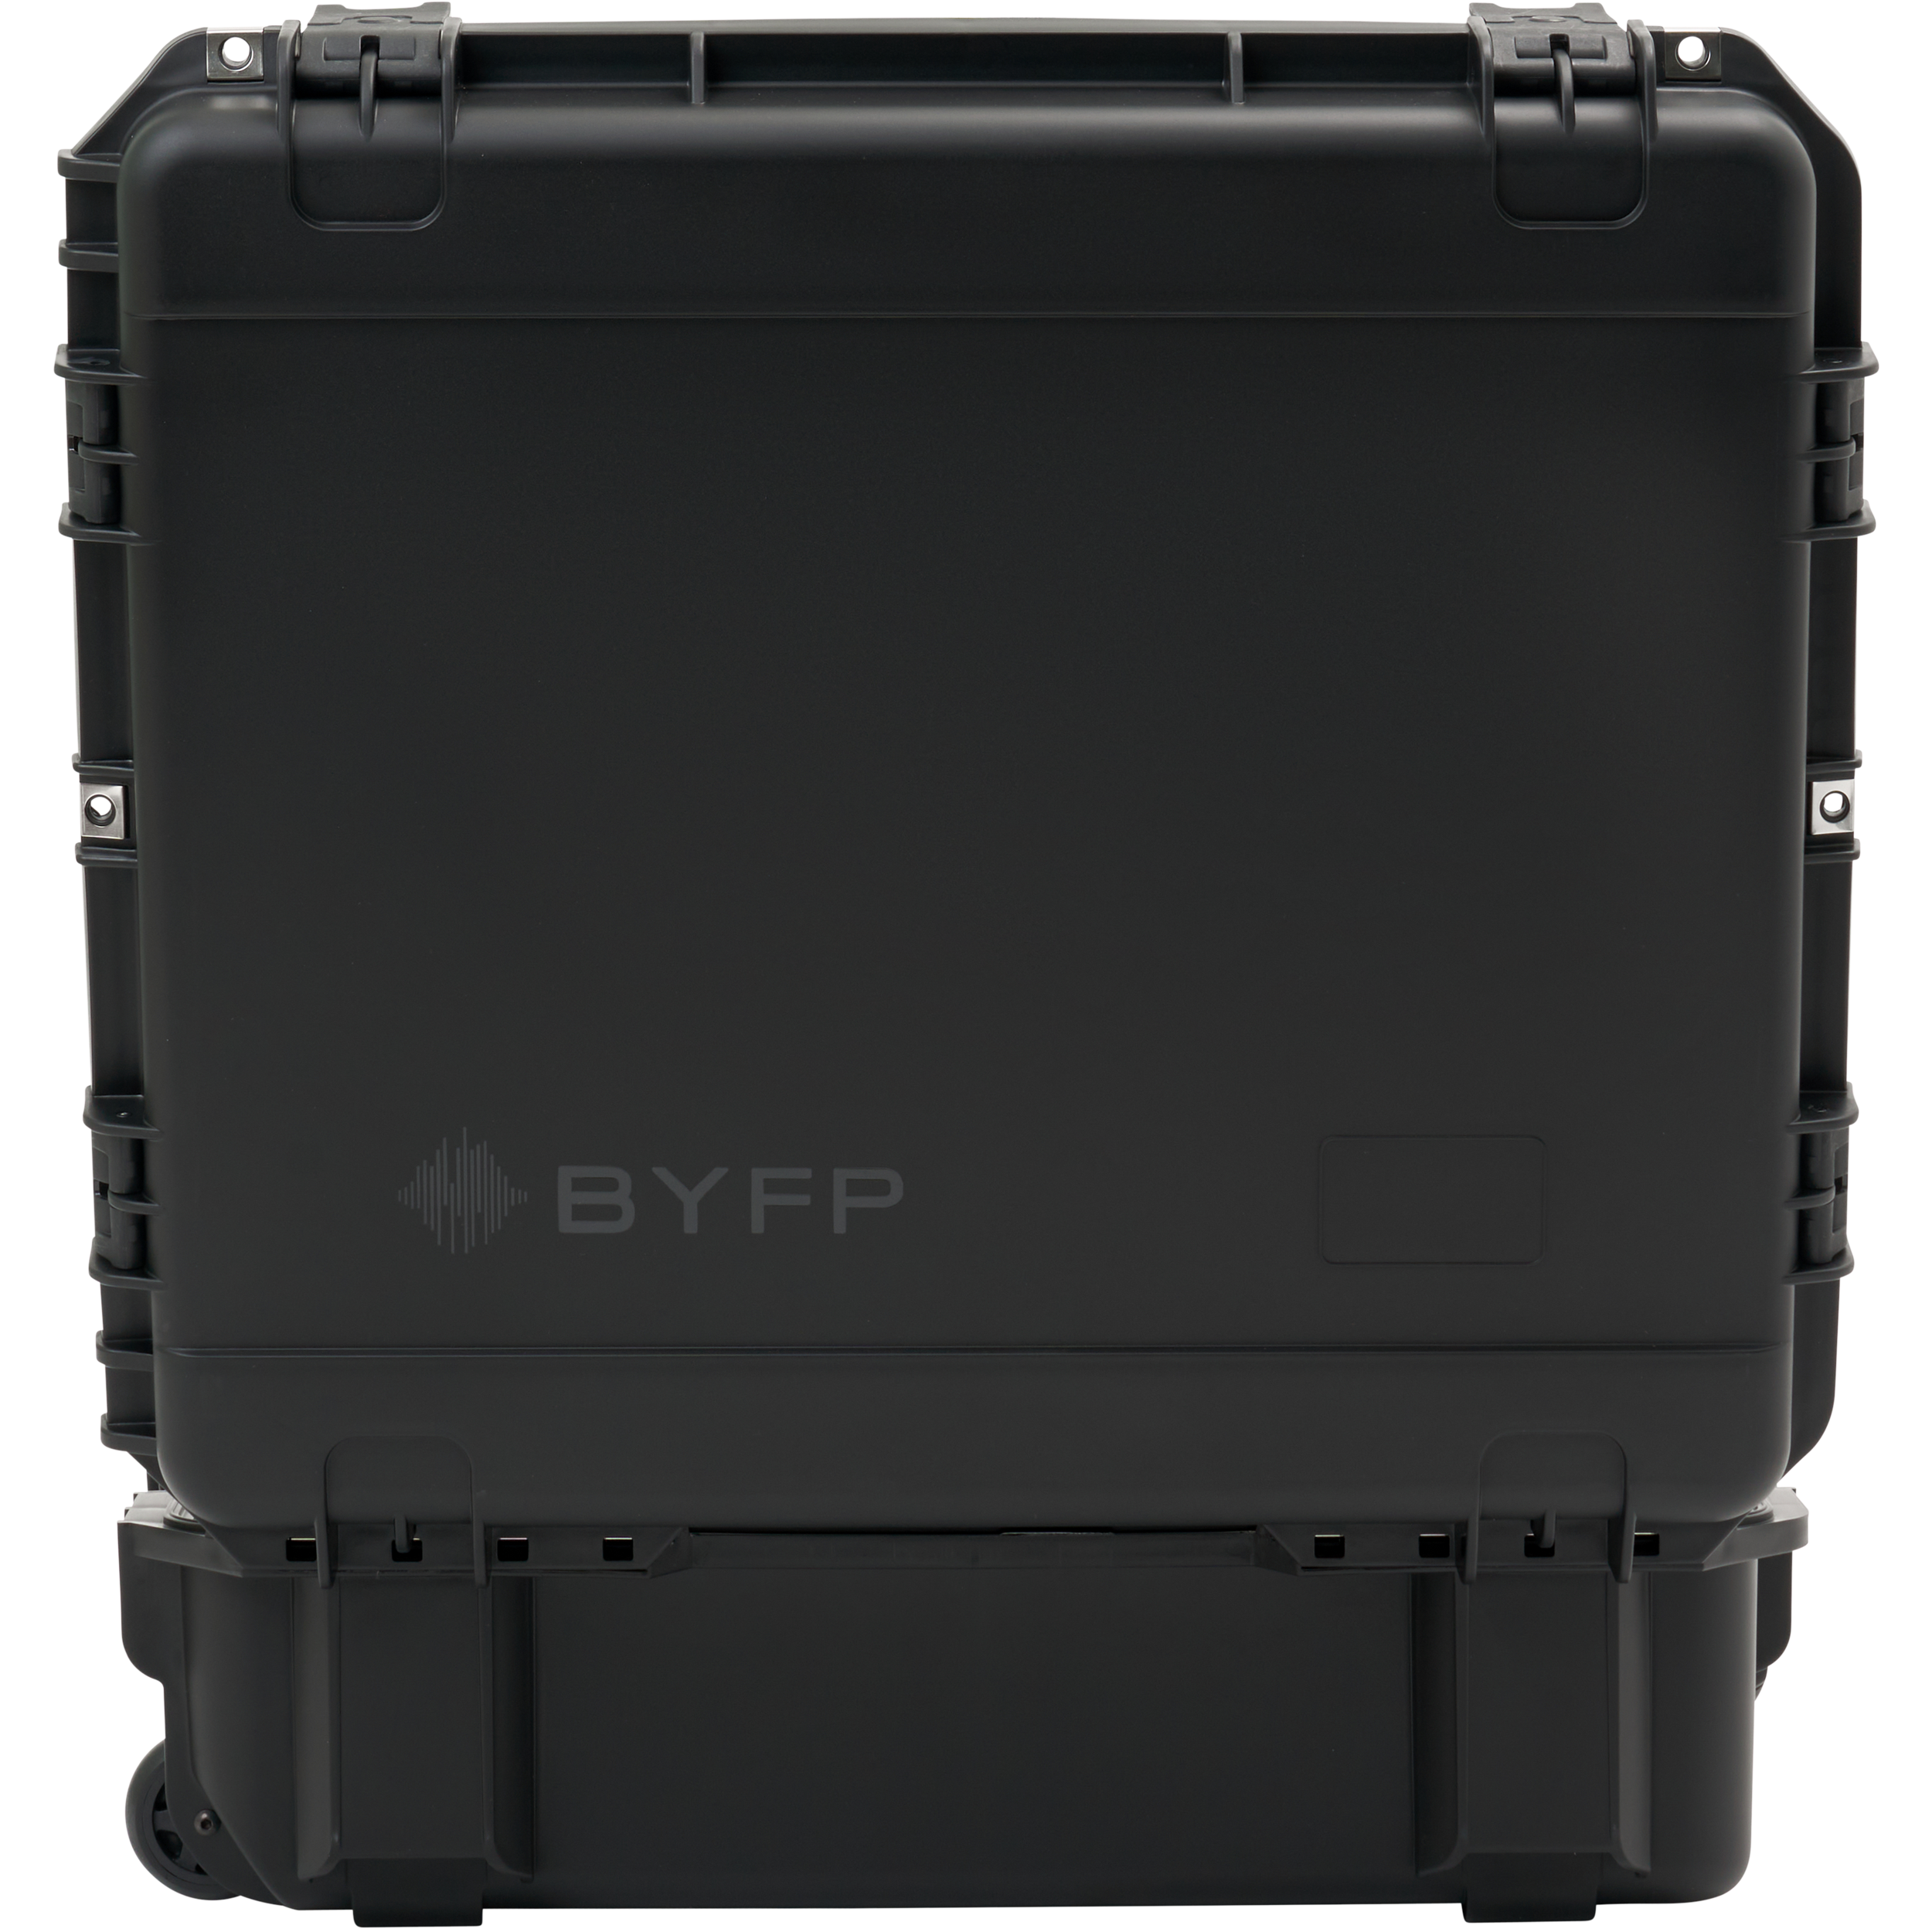 BYFP ipCase for 4x ADJ Uni Pack II Dimmers